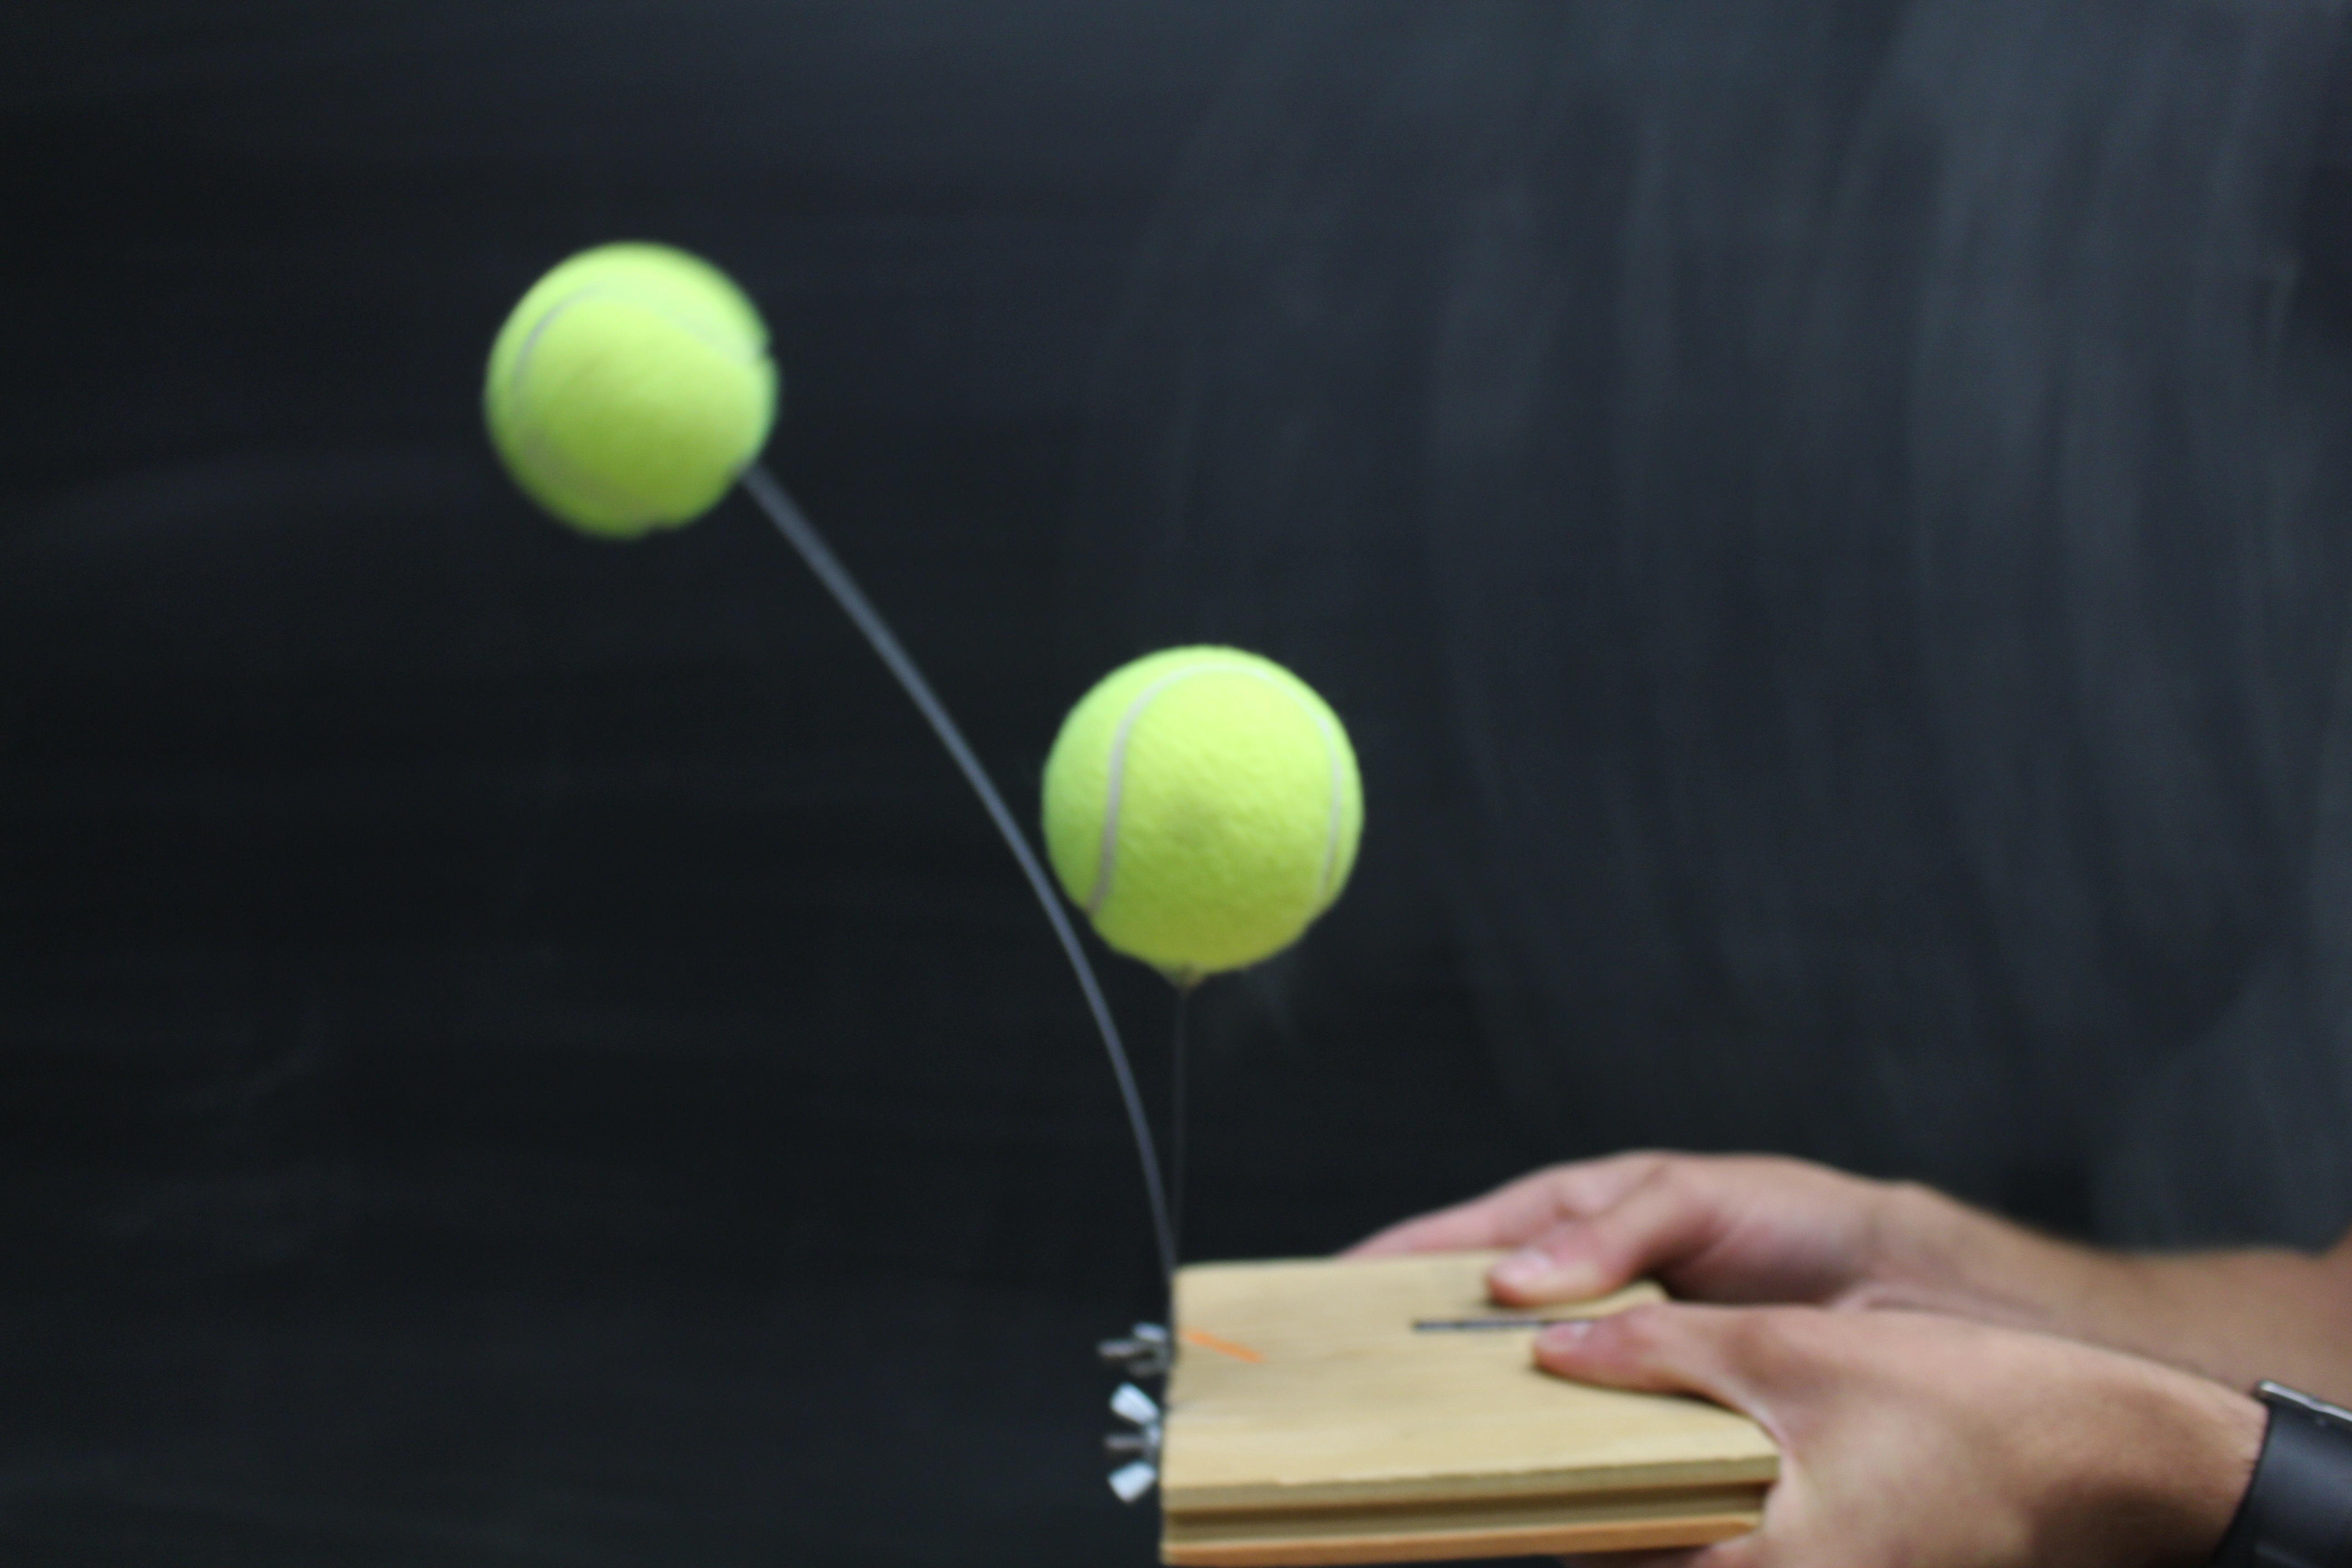 Tennis balls connected to a bendable metal rod